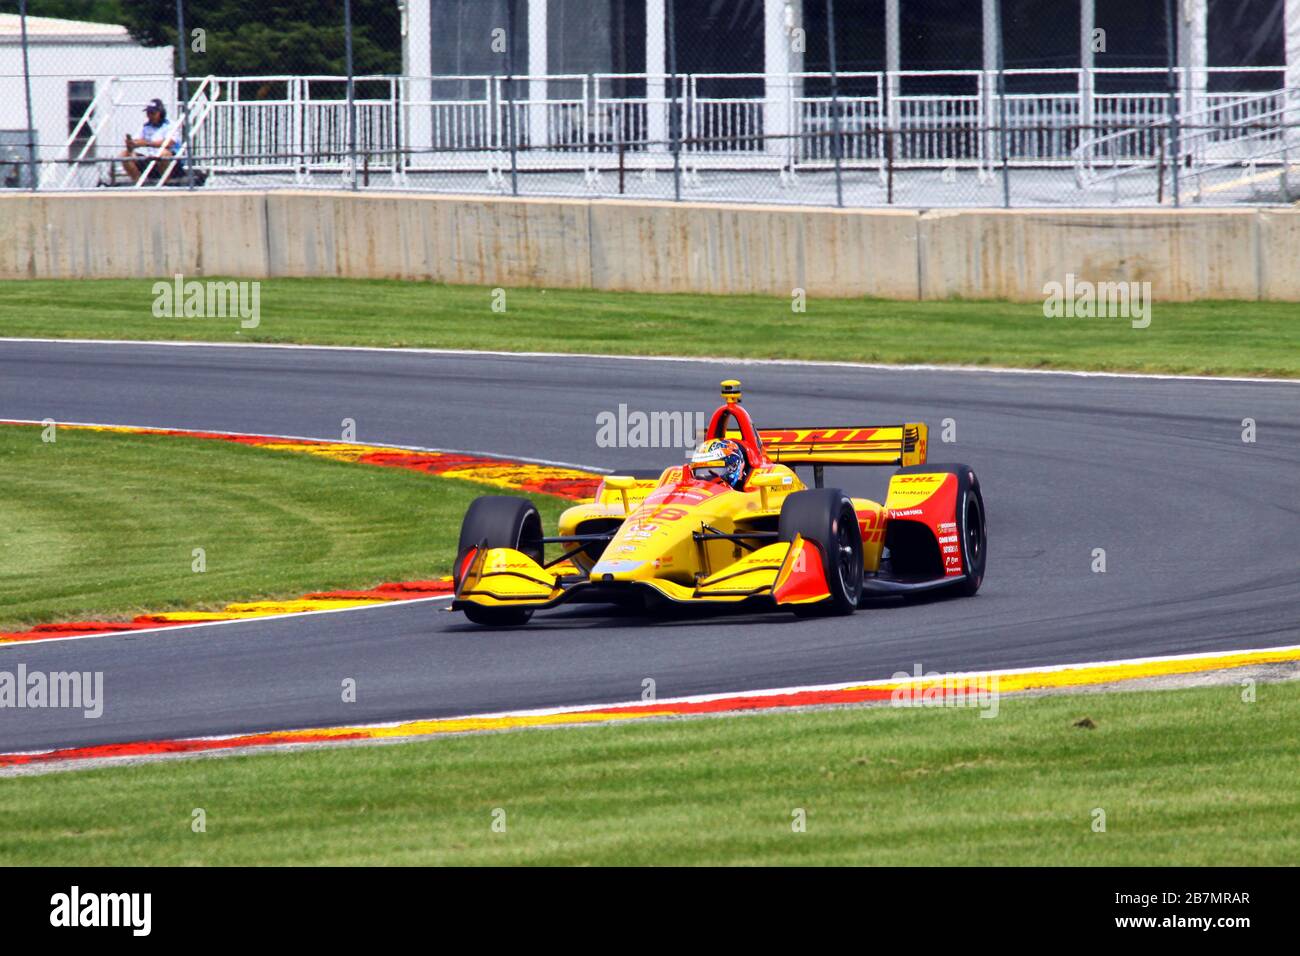 Elkhart Lake, Wisconsin - June 21, 2019: 28 Ryan Hunter-Reay, USA, Andretti Autosport, REV Group Grand Prix at Road America, on course for practice se Stock Photo